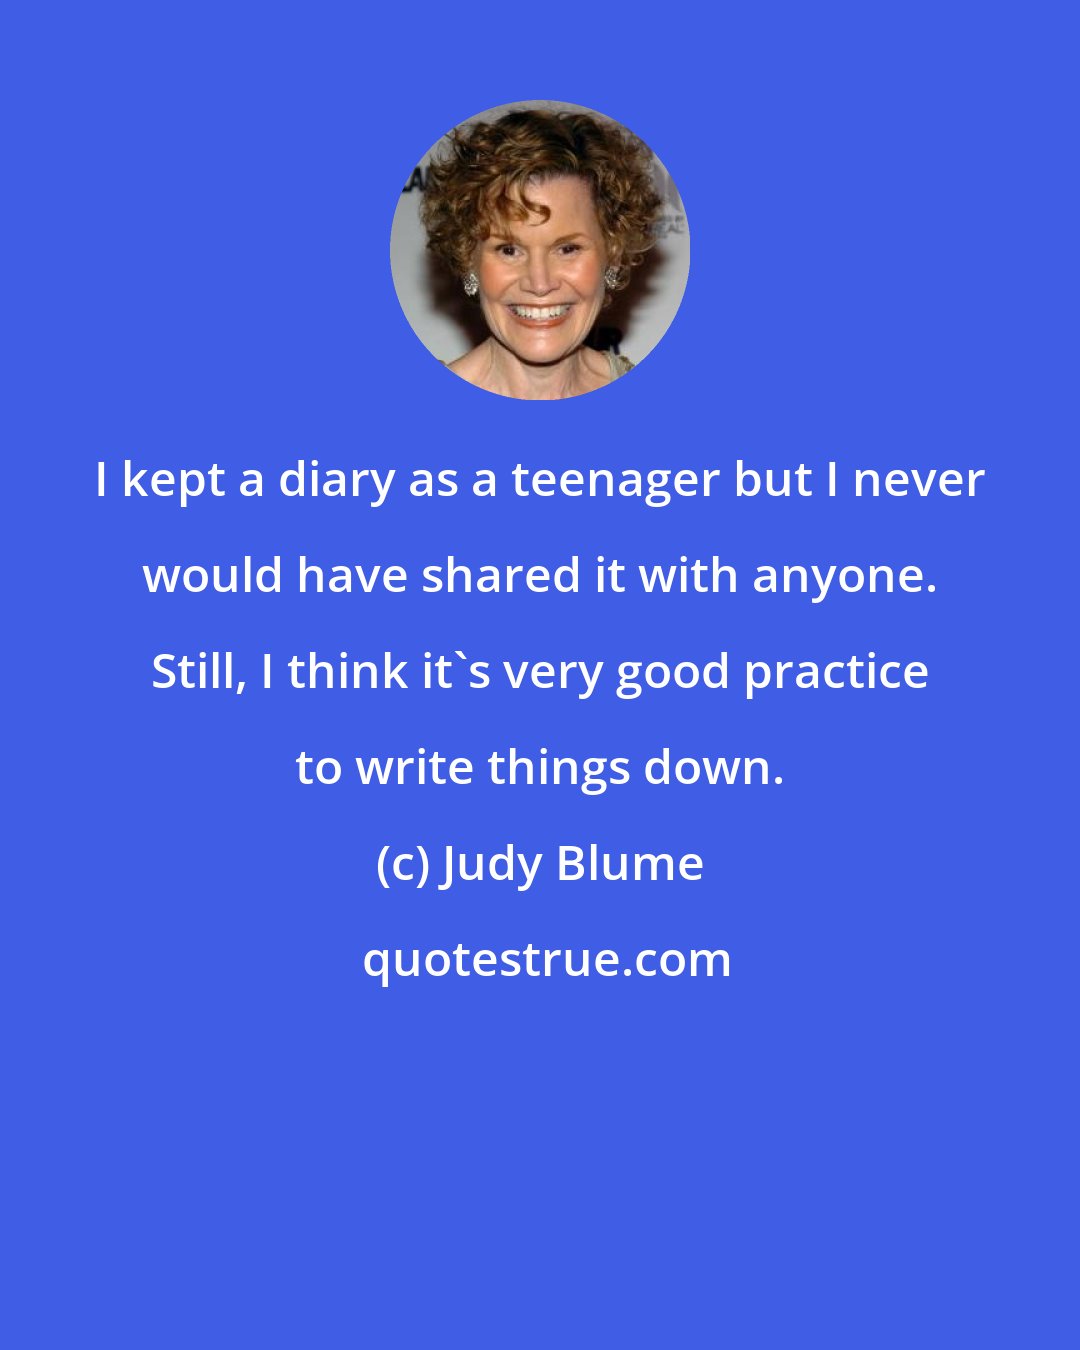 Judy Blume: I kept a diary as a teenager but I never would have shared it with anyone. Still, I think it's very good practice to write things down.